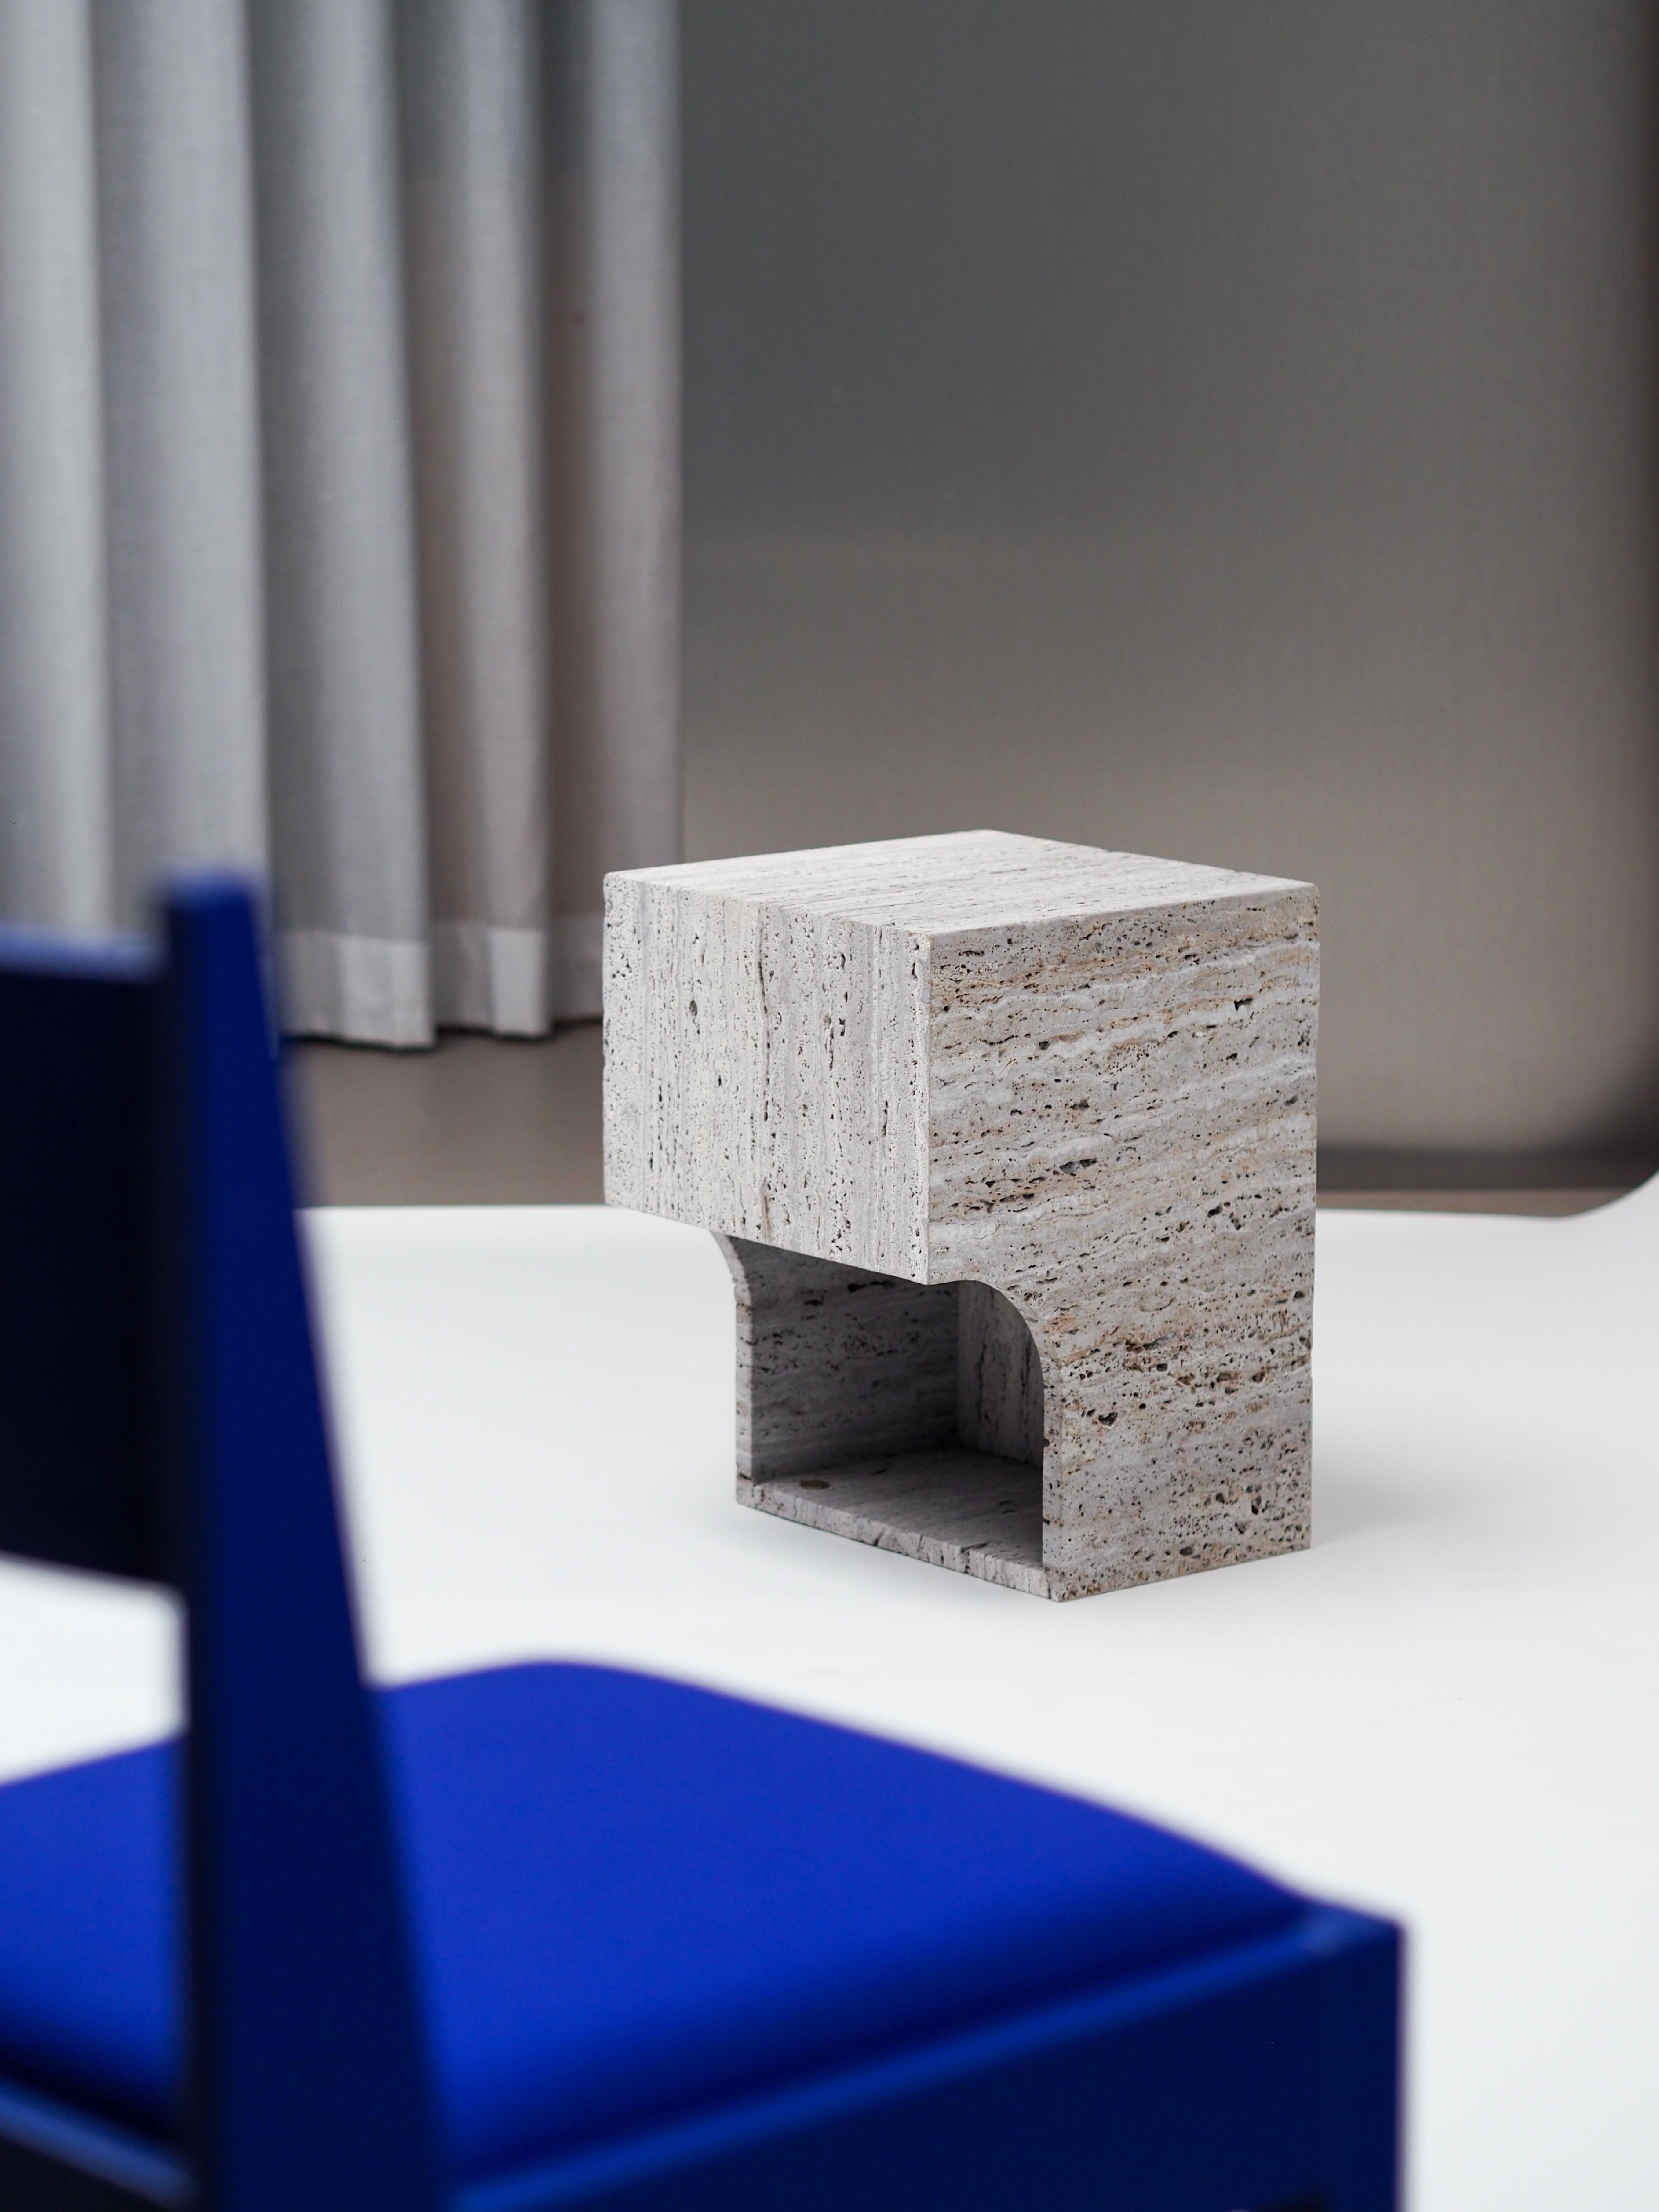 arch 01.2 c is a stool or side table. The arch 01.2 c takes things a little bit further than its precedent, the arch 01.1 c. It was designed into our latest travertine collection. A beautiful object that can fill a room on its own. The unveiled